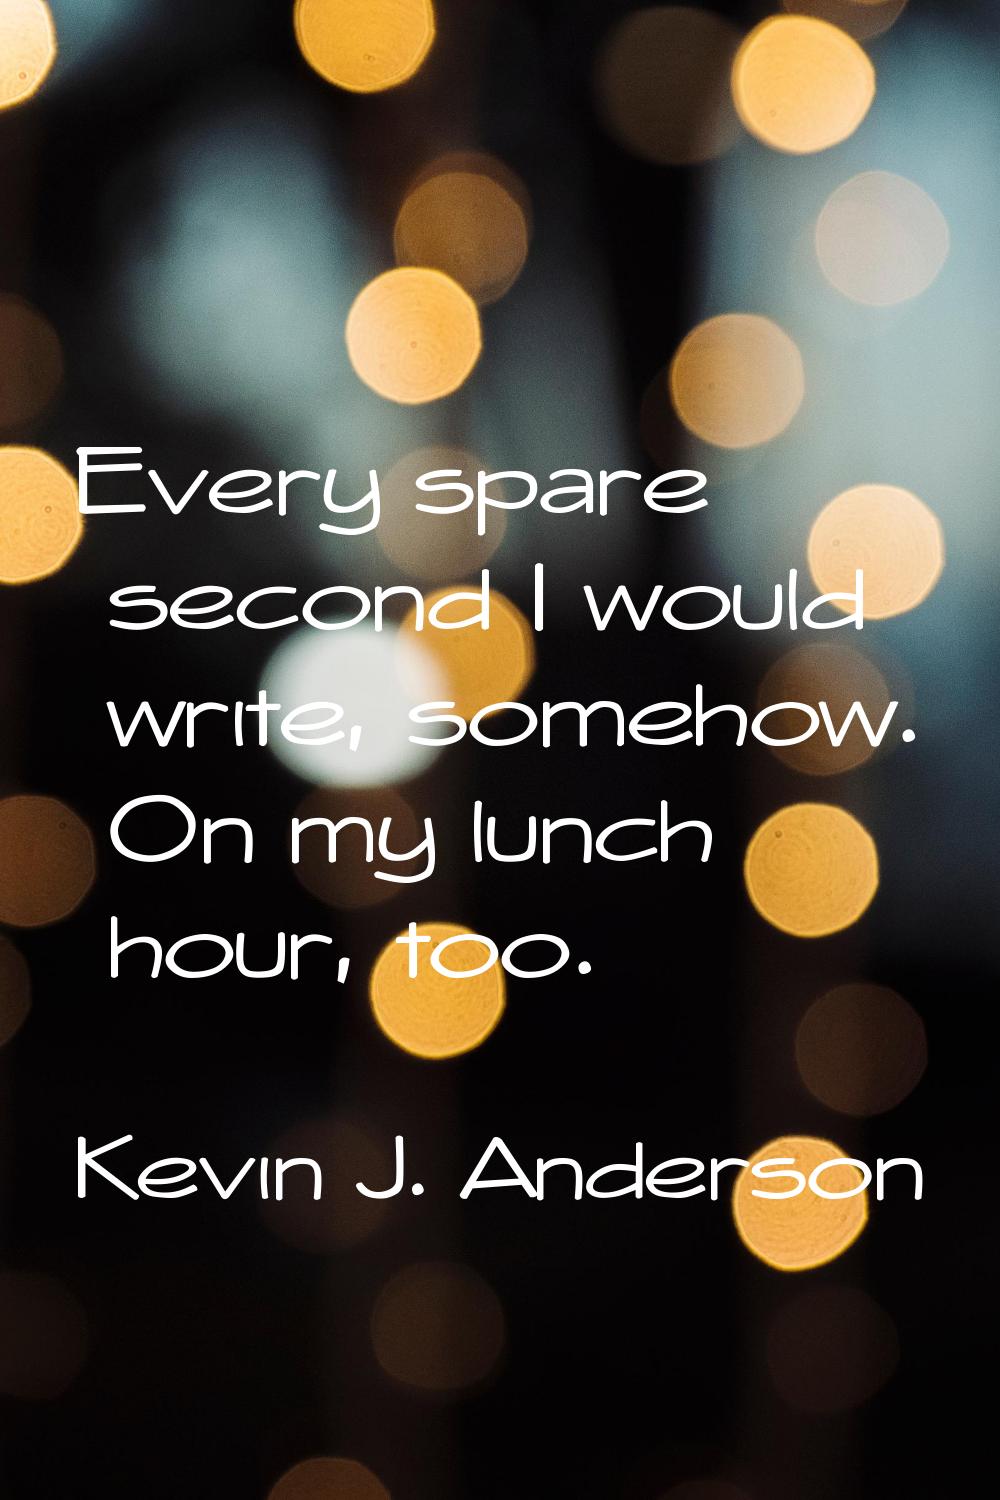 Every spare second I would write, somehow. On my lunch hour, too.